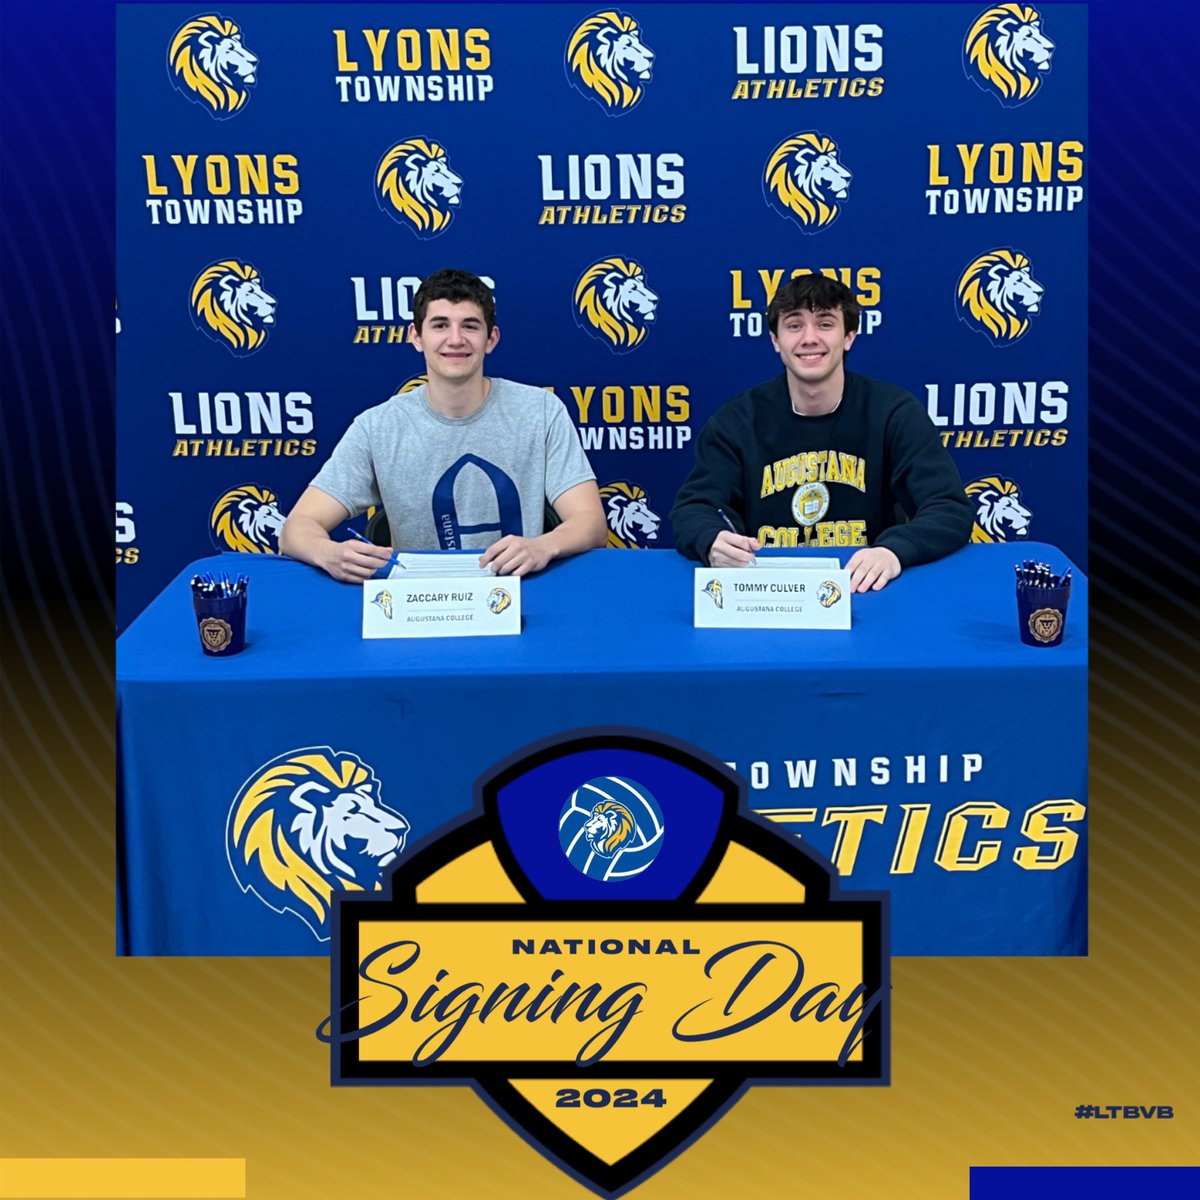 Spring Signing Day! Congratulations to Zaccary Ruiz, OH, and Tommy Culver, S, on their signing to Augustana College!! Signed…🖋️